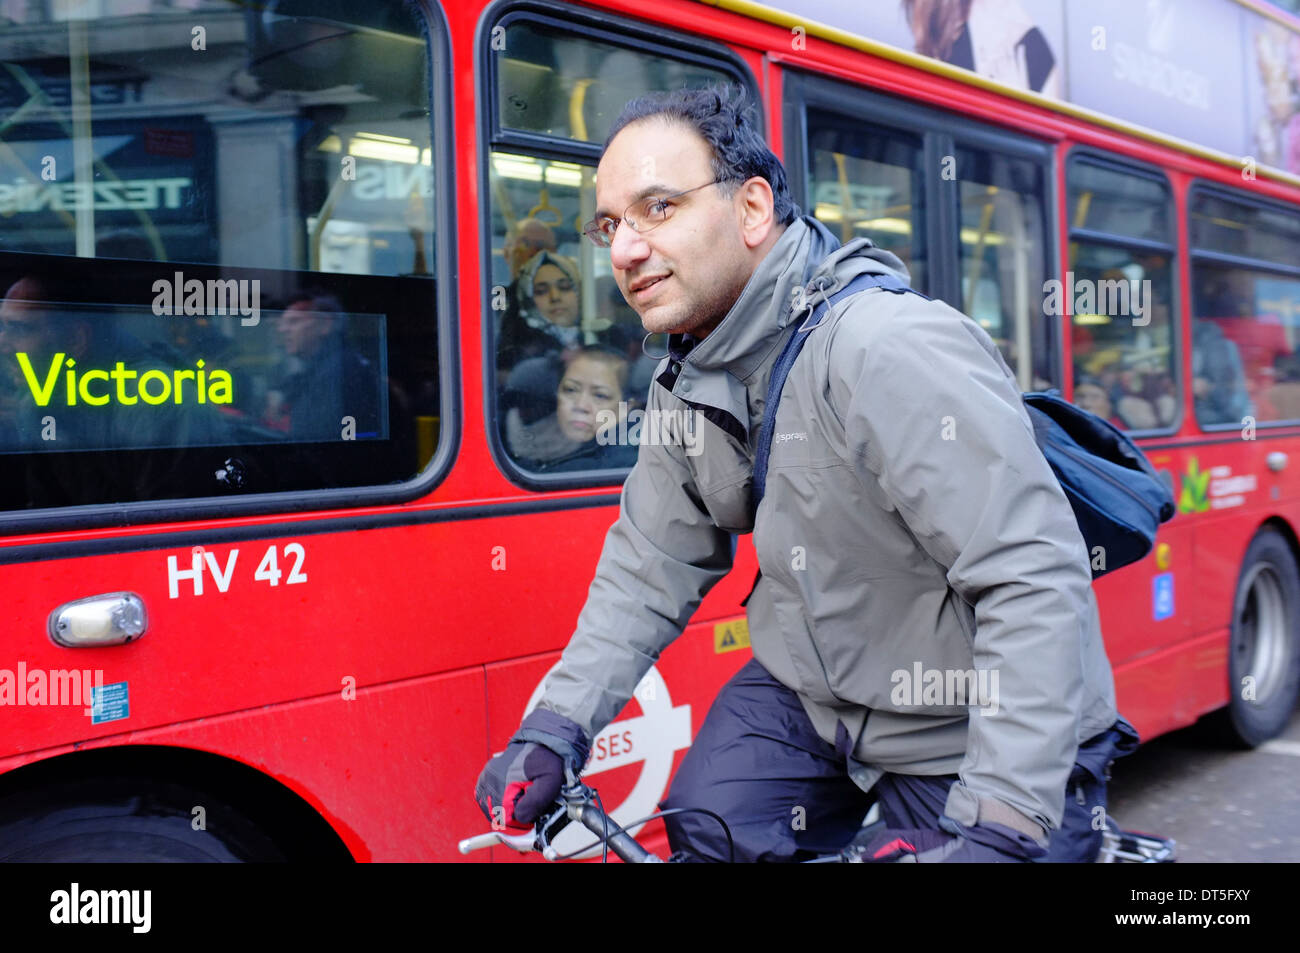 Cyclist with Red London Bus on Oxford street, London Stock Photo